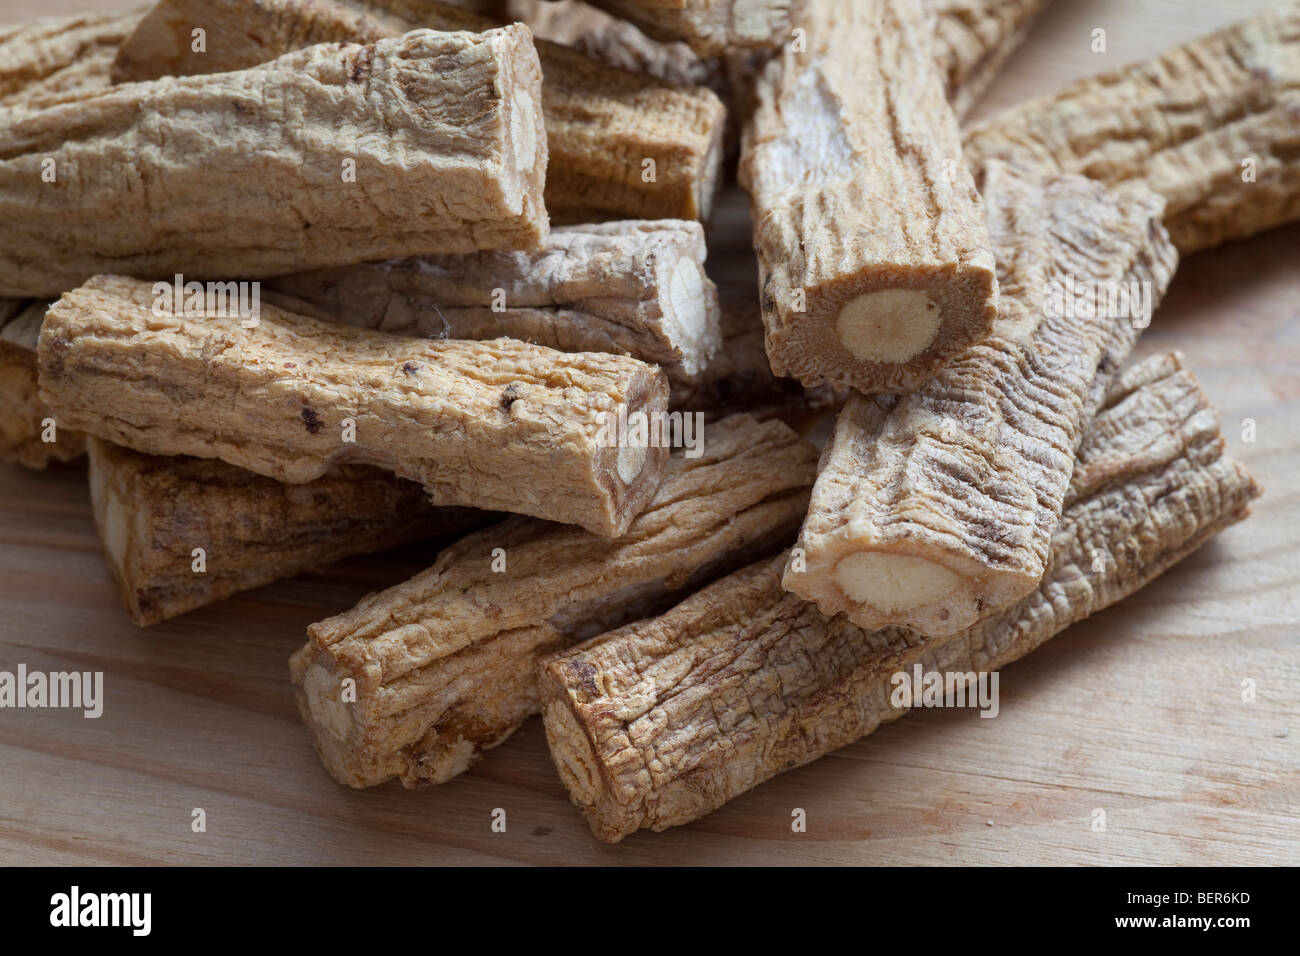 Chinese herbal medicine, one ingredient, possibly a ginseng root Stock Photo